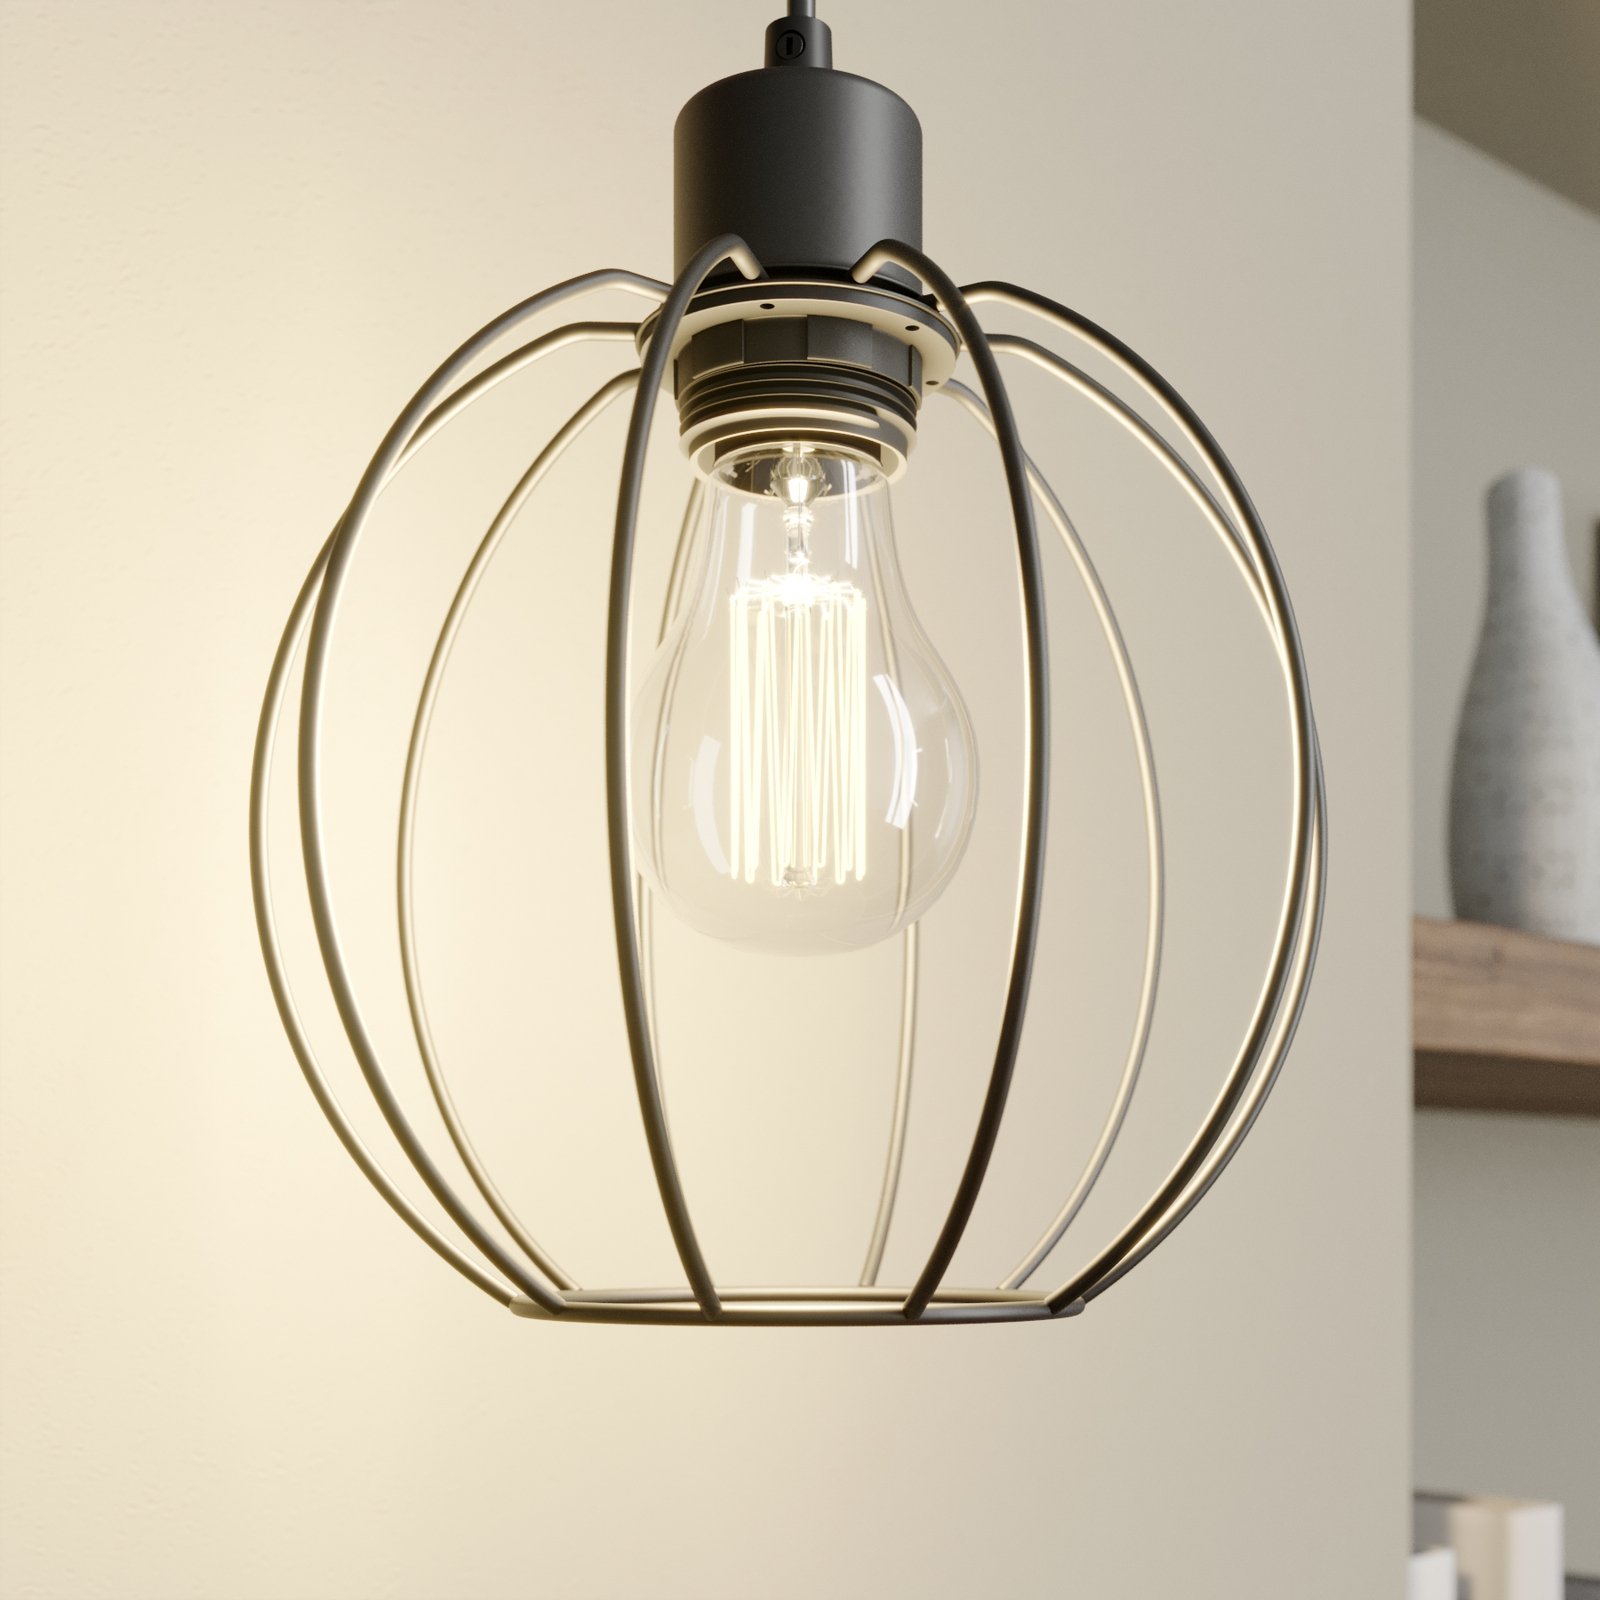 Karou wall light, stained brown